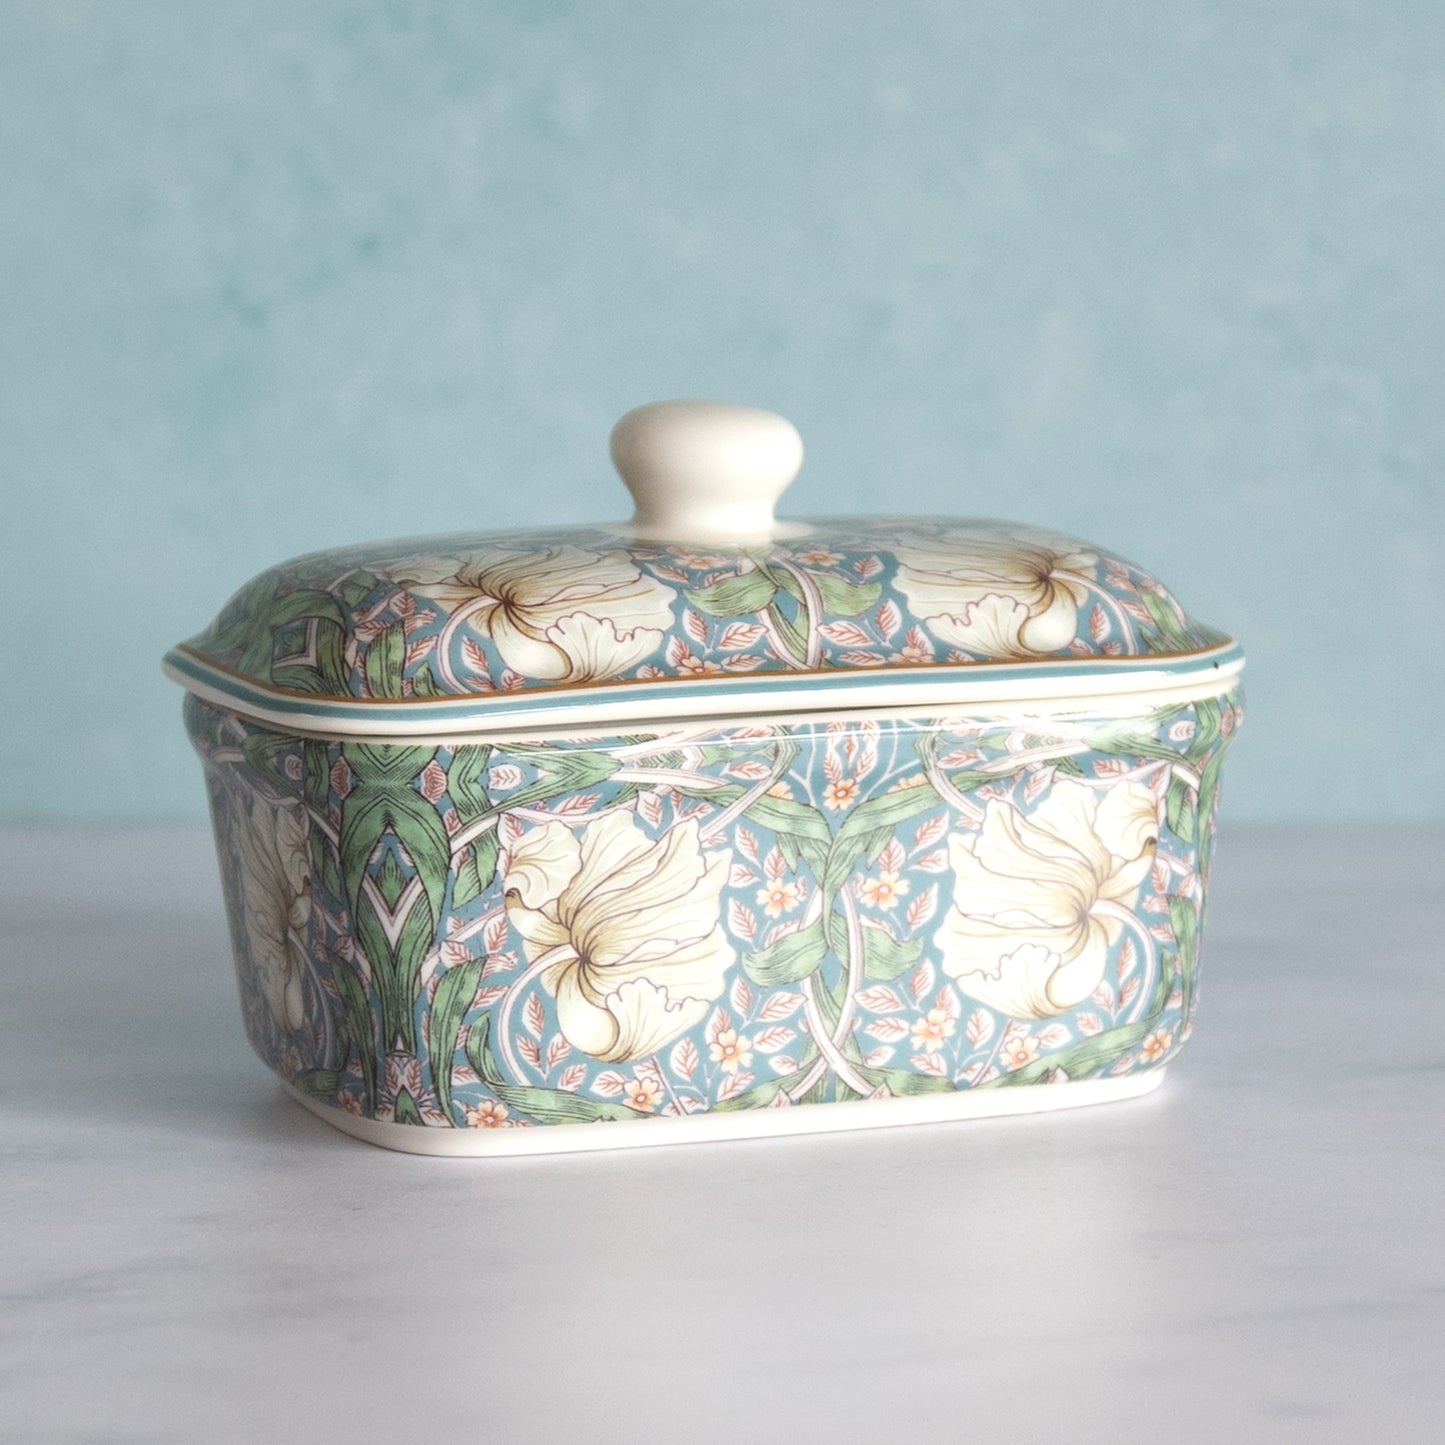 William Morris Pimpernel Butter Dish with Lid